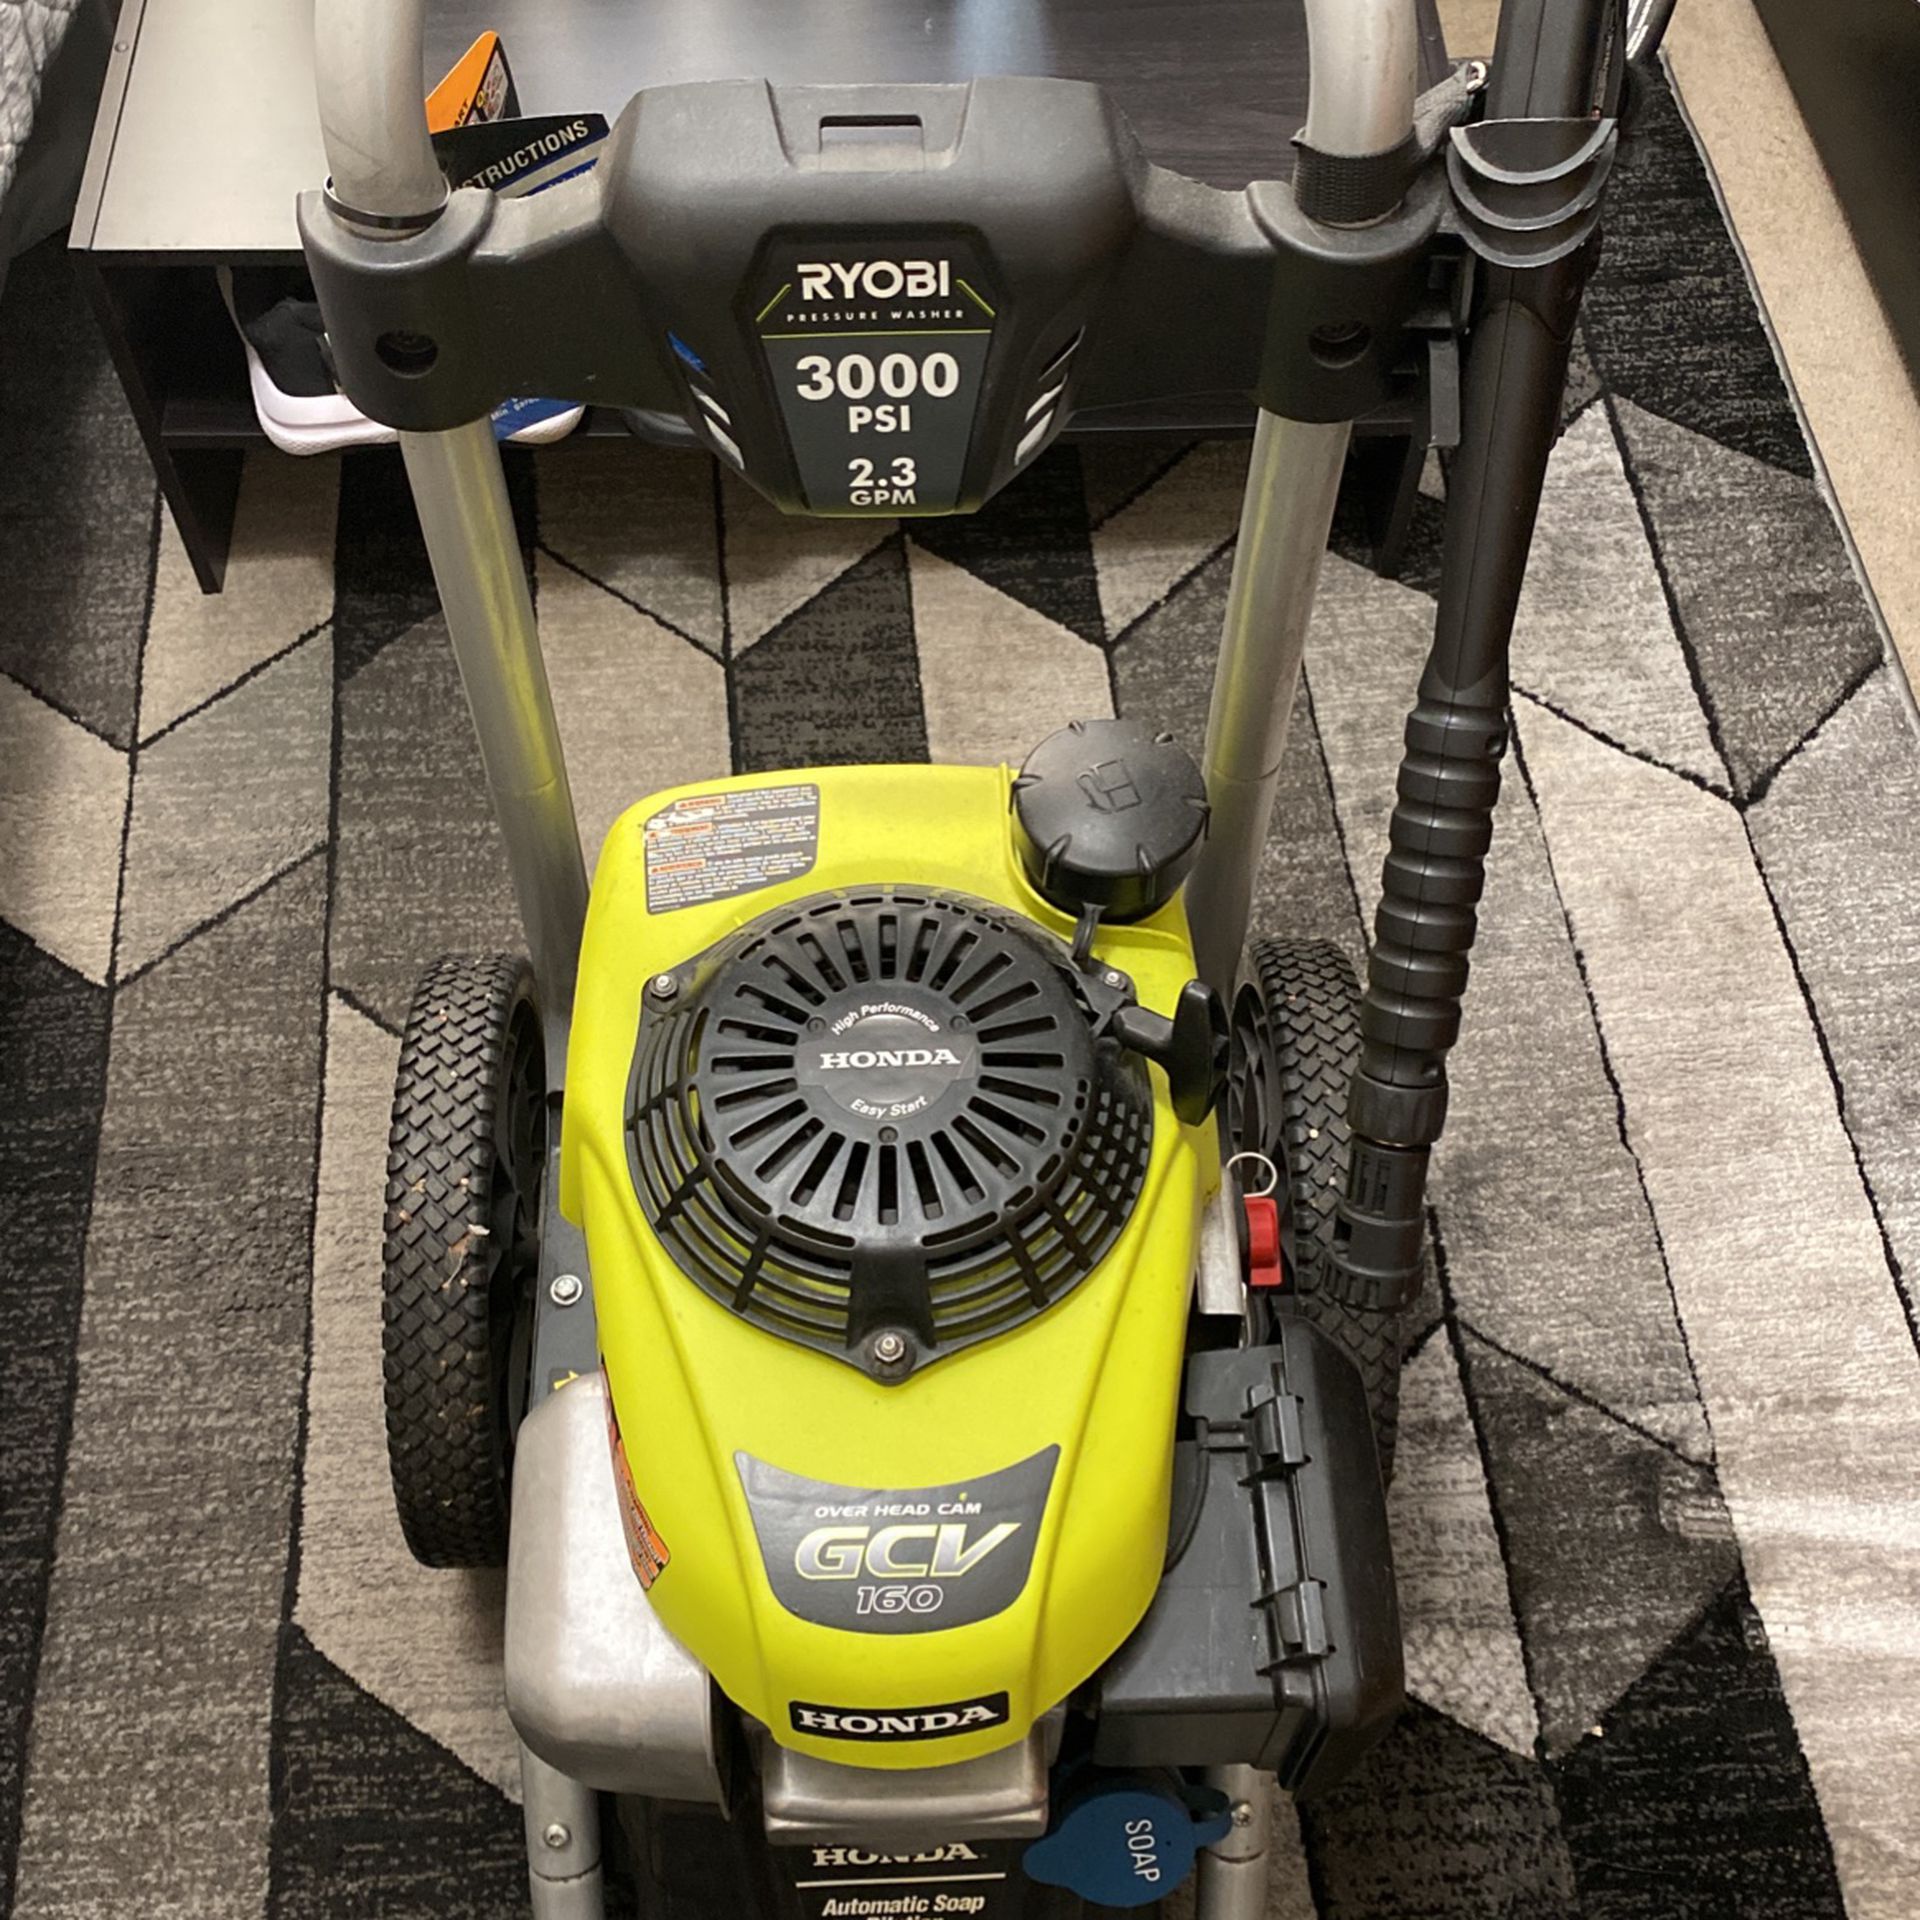 $400 Ryobi Gas Powered Pressure Washer 3000 Psi 2.3 Gpm NO HOSE.Won’t Find 1as New As This One They Are Discontinued And This Is A Awesome Machine.